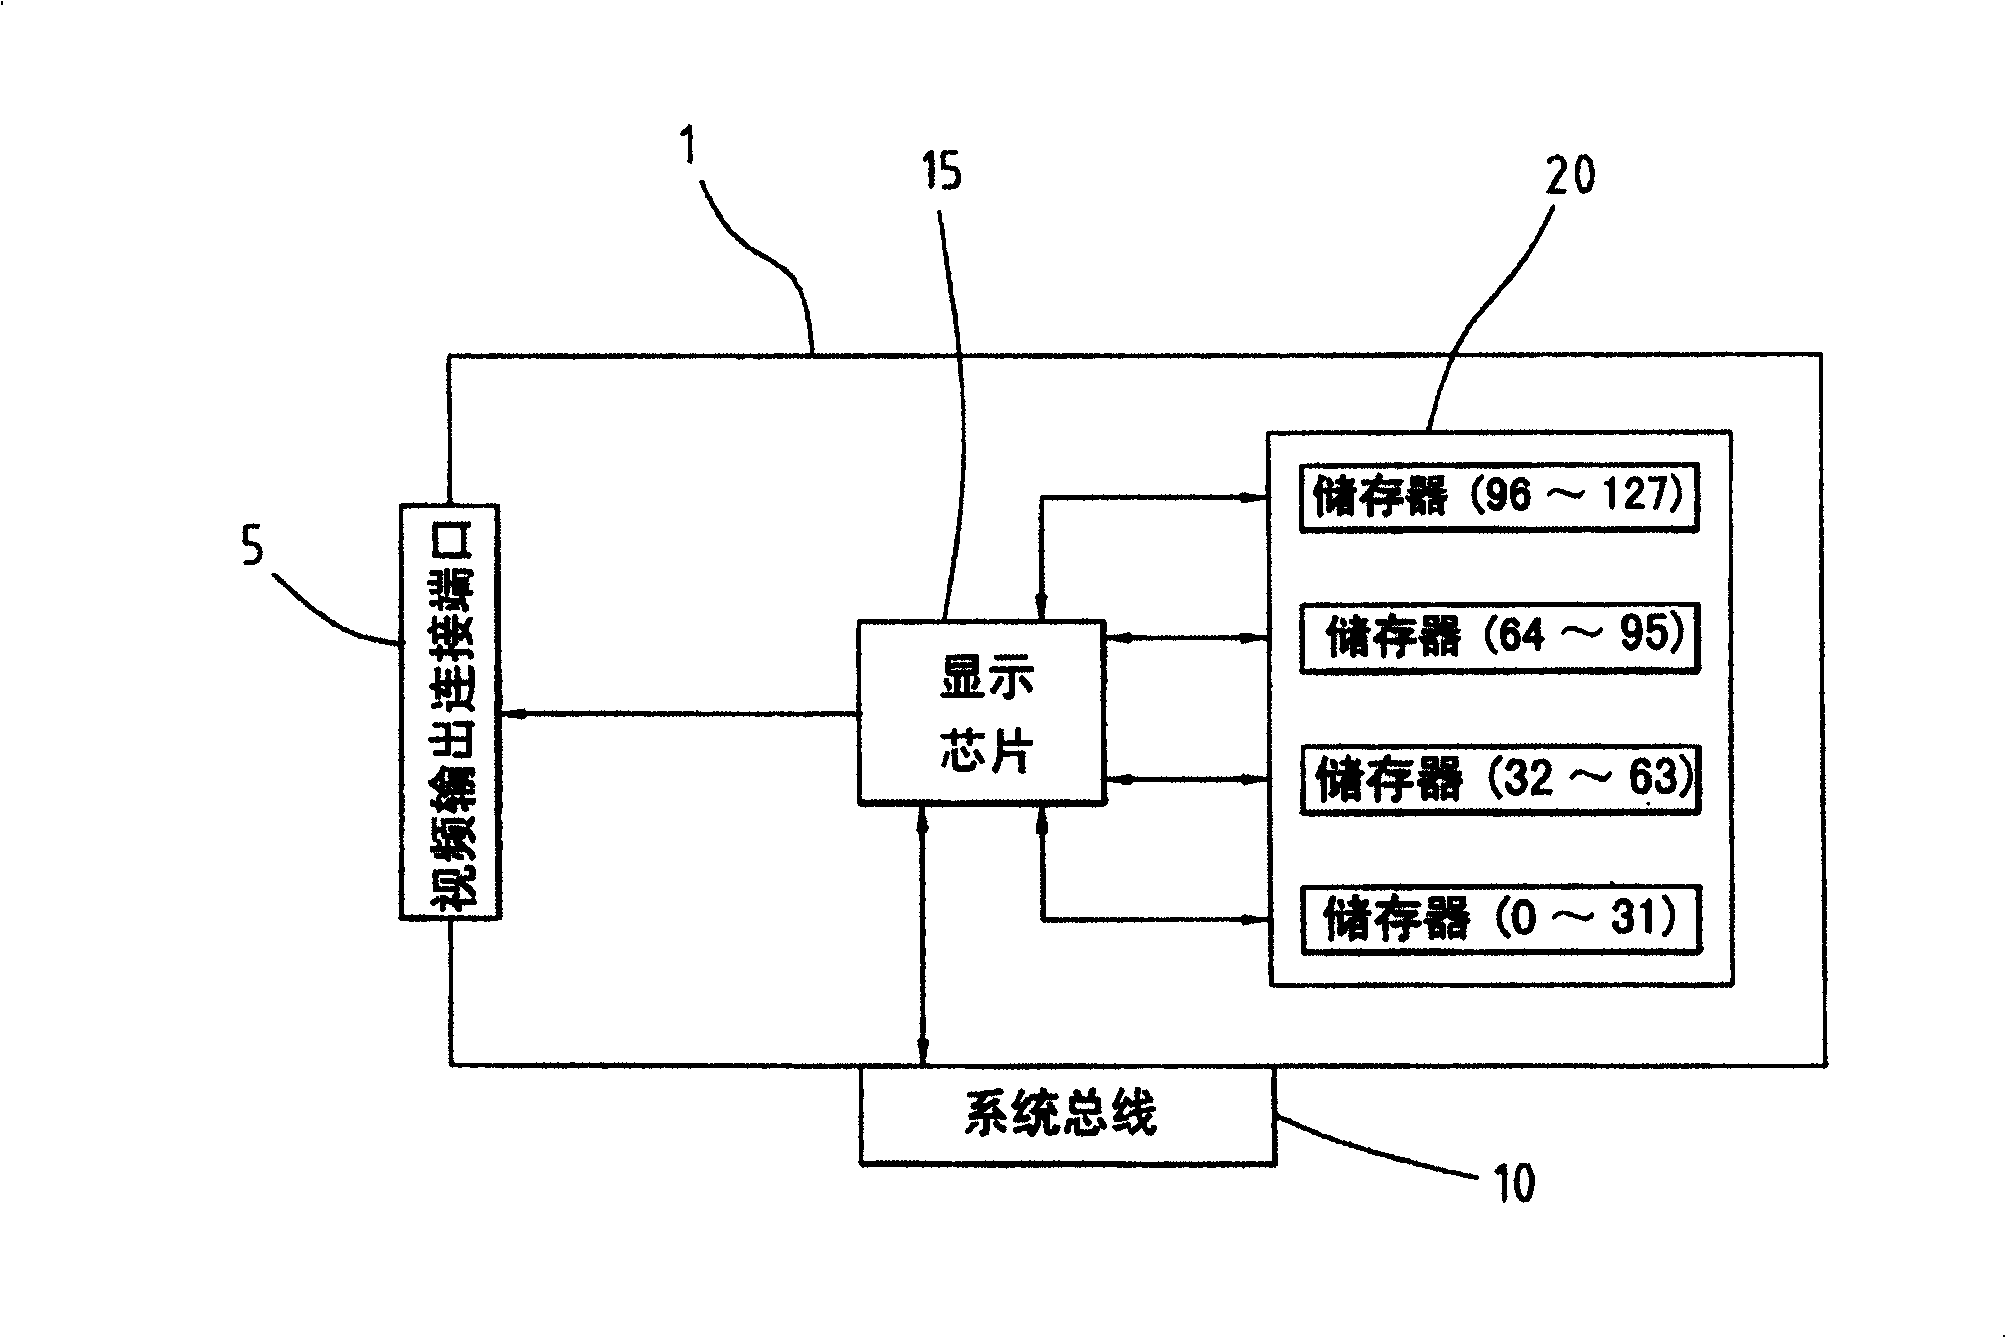 Memory bus wiring structure and wiring method for low profile display card